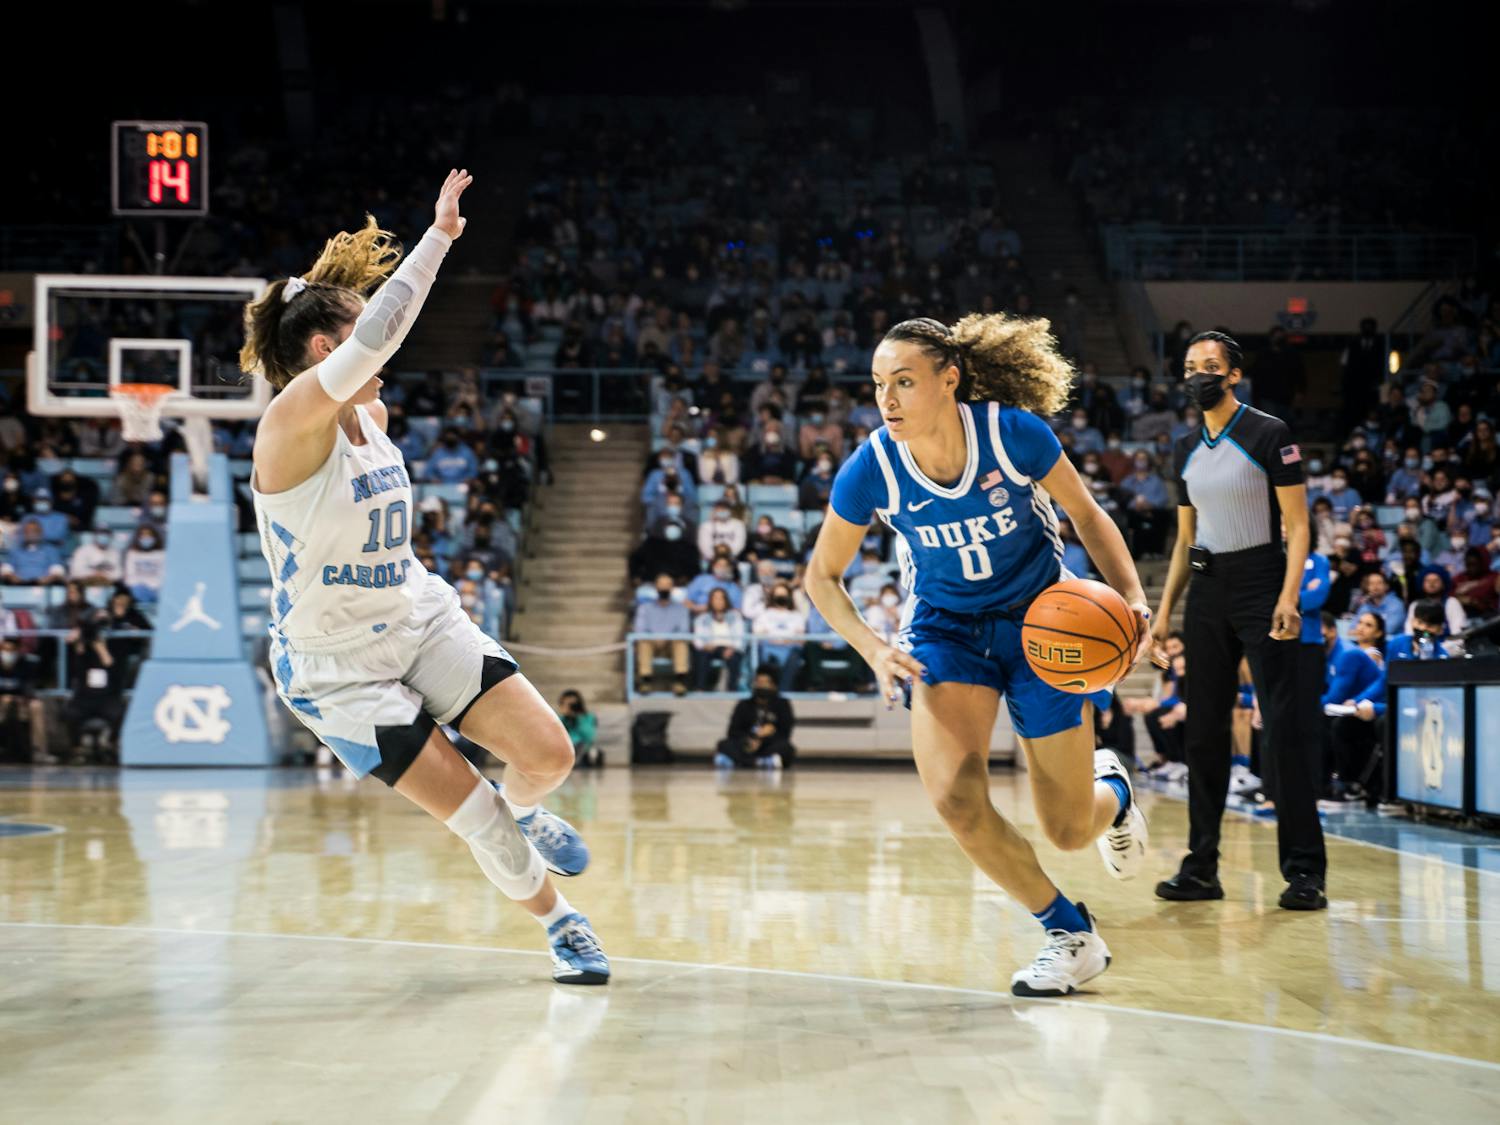 Junior guard Celeste Taylor led Duke with 14 points on 5-of-11 shooting against North Carolina. 